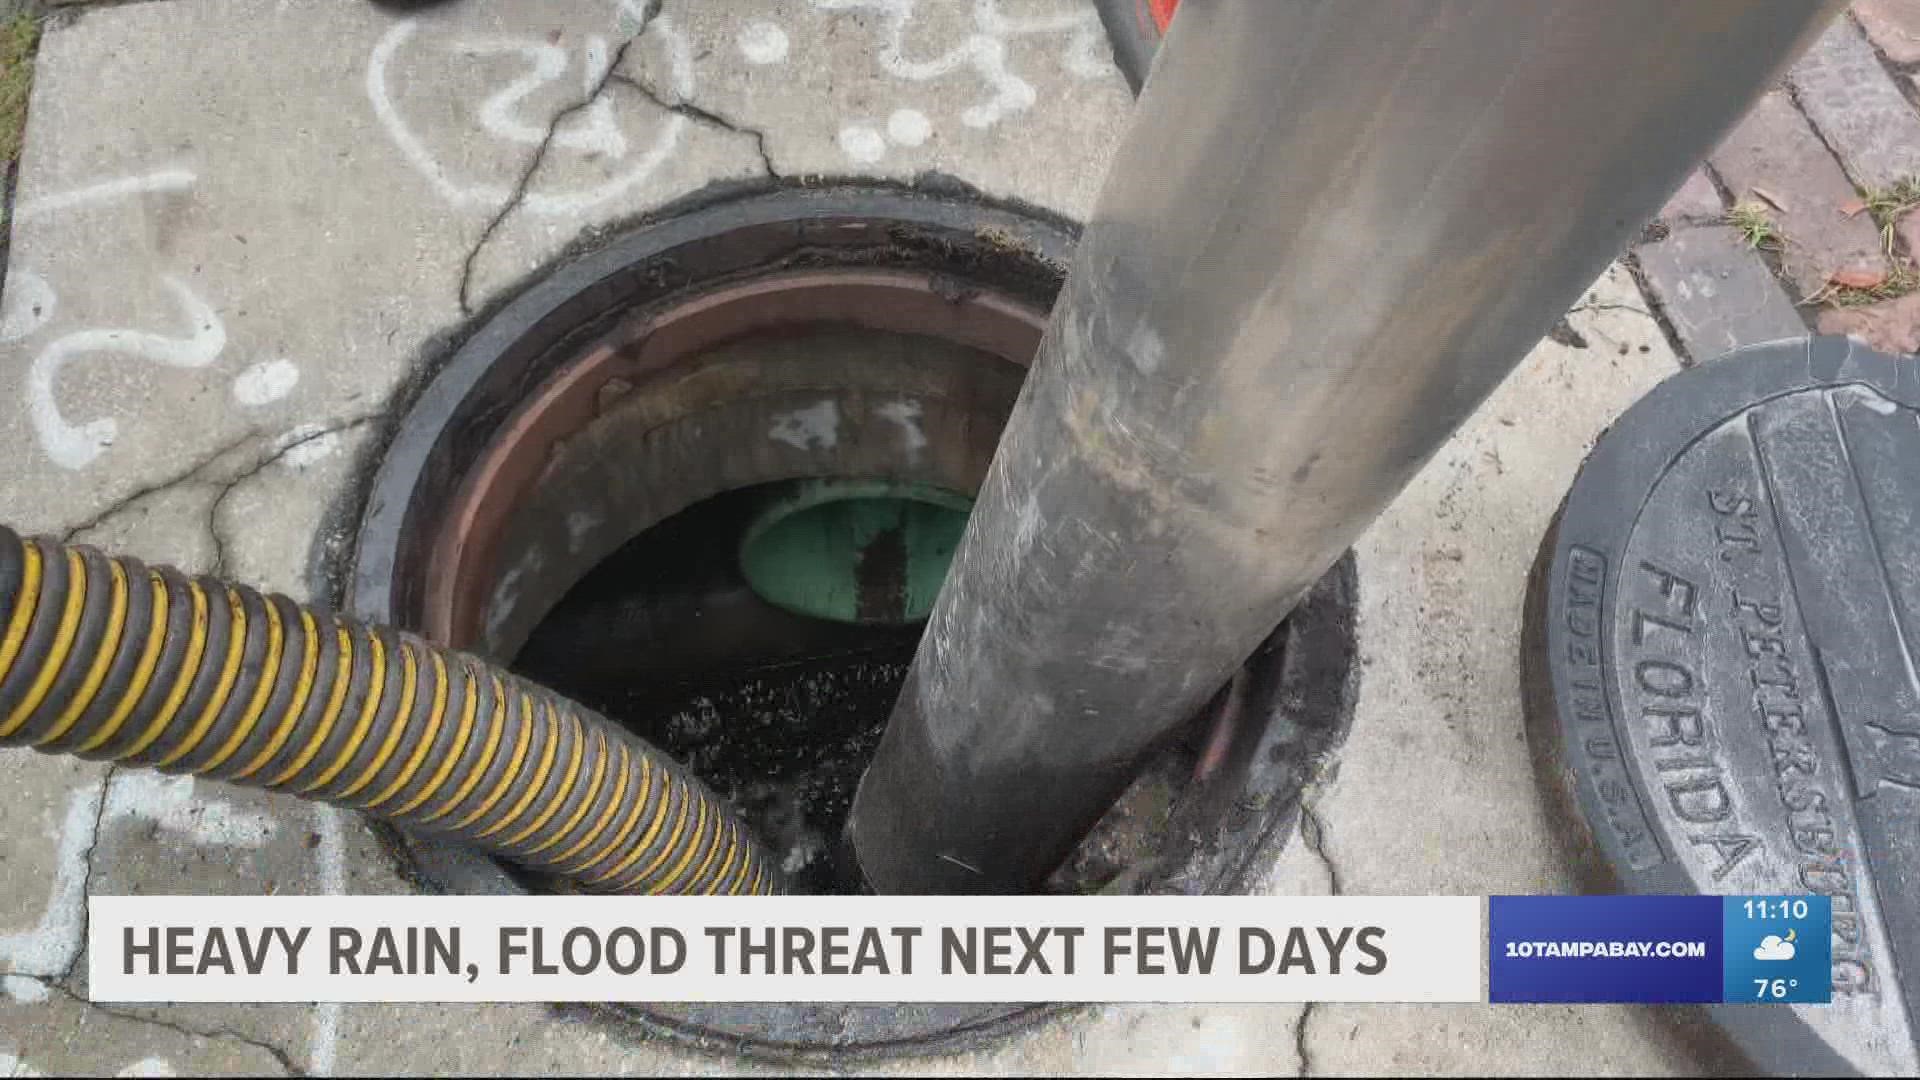 Tampa stormwater crews cleared drains and checked flooding hotspots Thursday morning, preparing for heavy rain expected over the next few days.